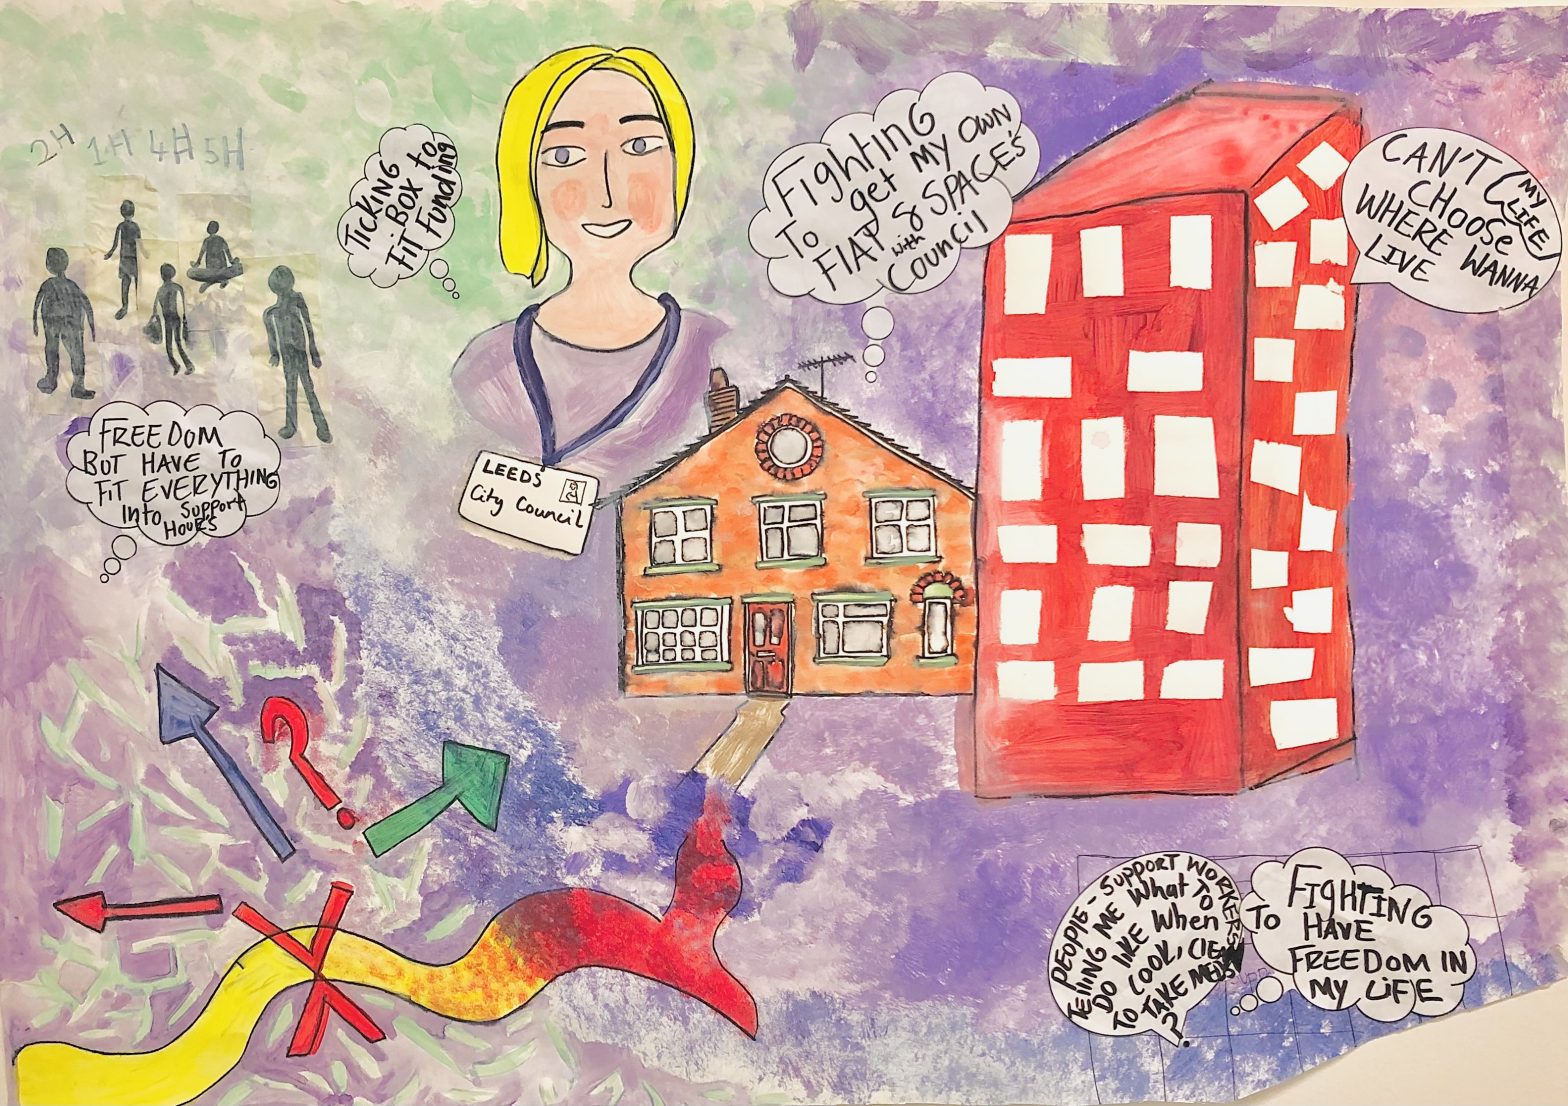 Colourful, hand drawn and painted image showing the head and shoulders of a person, with a block of flats and some smaller human figures in the background. The image contains text that reads 'ticking box to fit funding’, fighting to get my own flat and spaces with council’, ‘cant choose my life where wanna live’, freedom, but have to fit everything into support hours’, ‘people support workers telling me what to do like, when to cook, to take meds’, ‘fighting to have freedom in my life’.